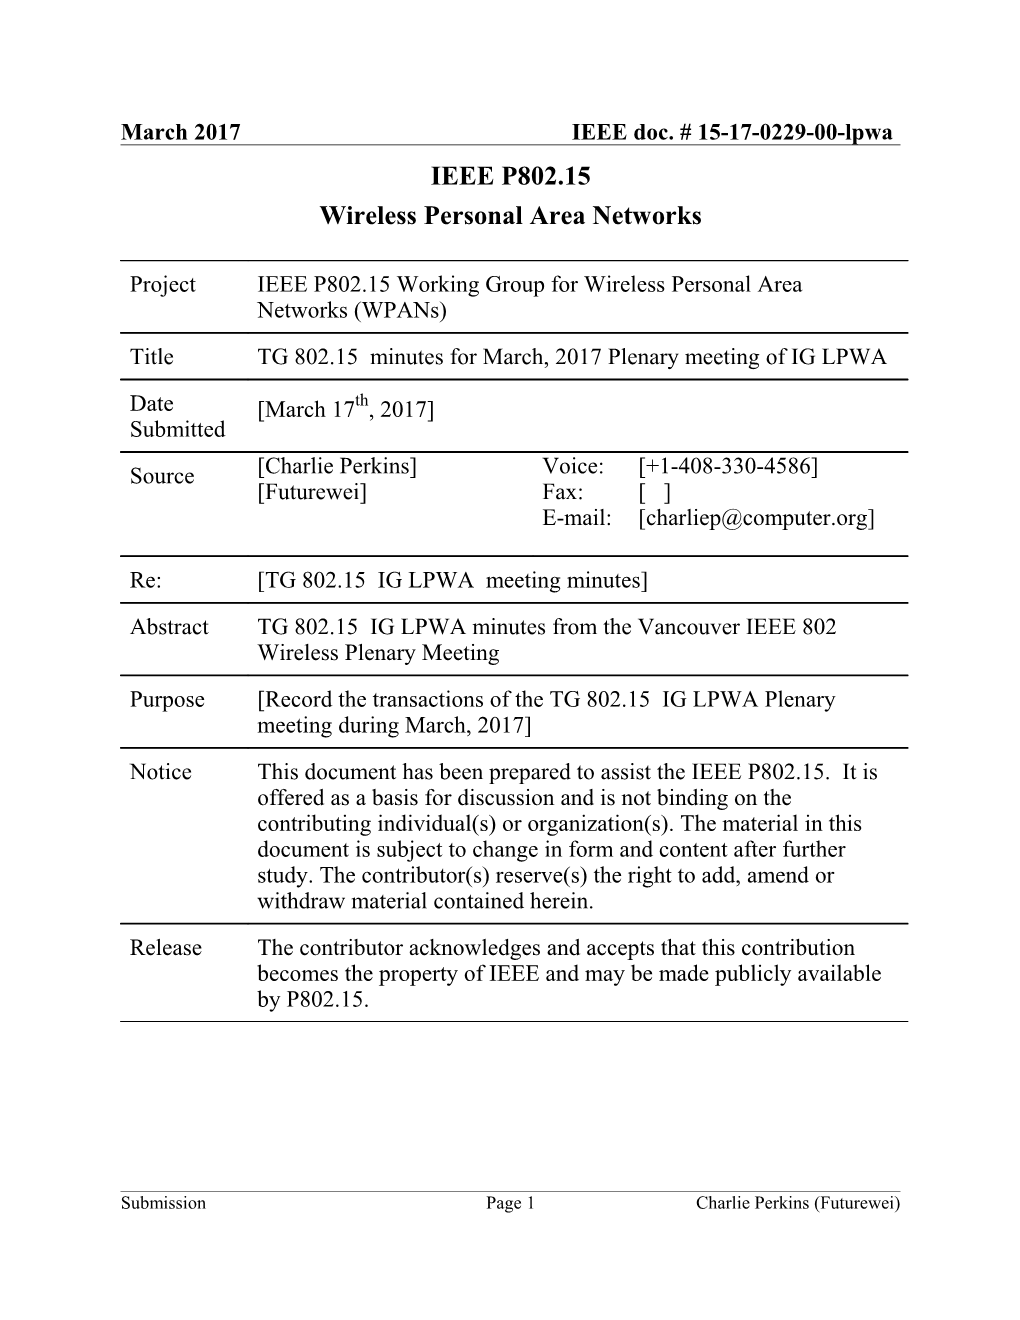 Wireless Personal Area Networks s24